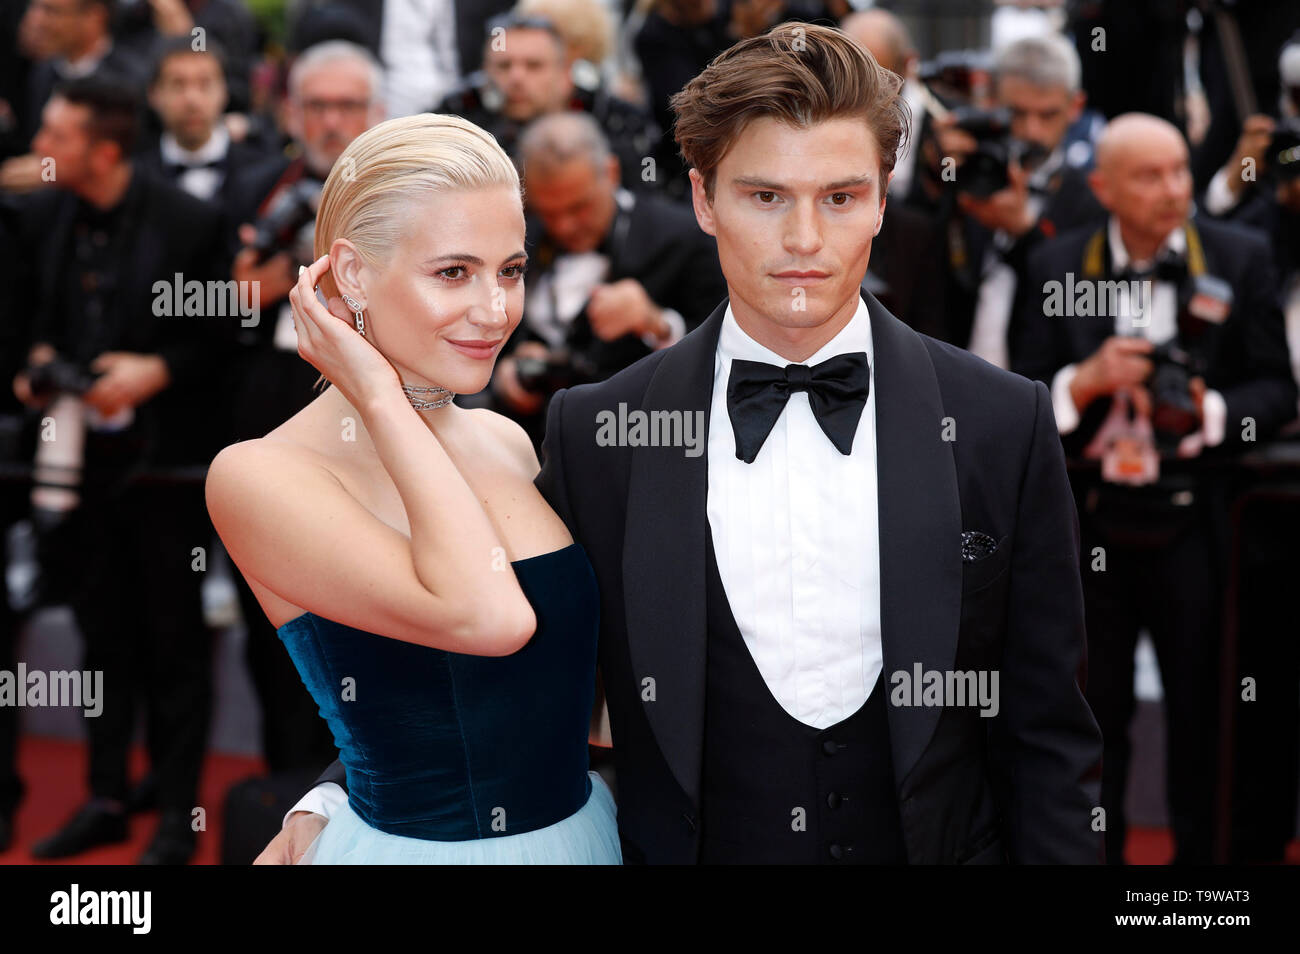 Cannes, France. 20th May, 2019. Oliver Cheshir and Pixie Lott attending the 'La belle époque' premiere during the 72nd Cannes Film Festival at the Palais des Festivals on May 20, 2019 in Cannes, France Credit: Geisler-Fotopress GmbH/Alamy Live News Stock Photo